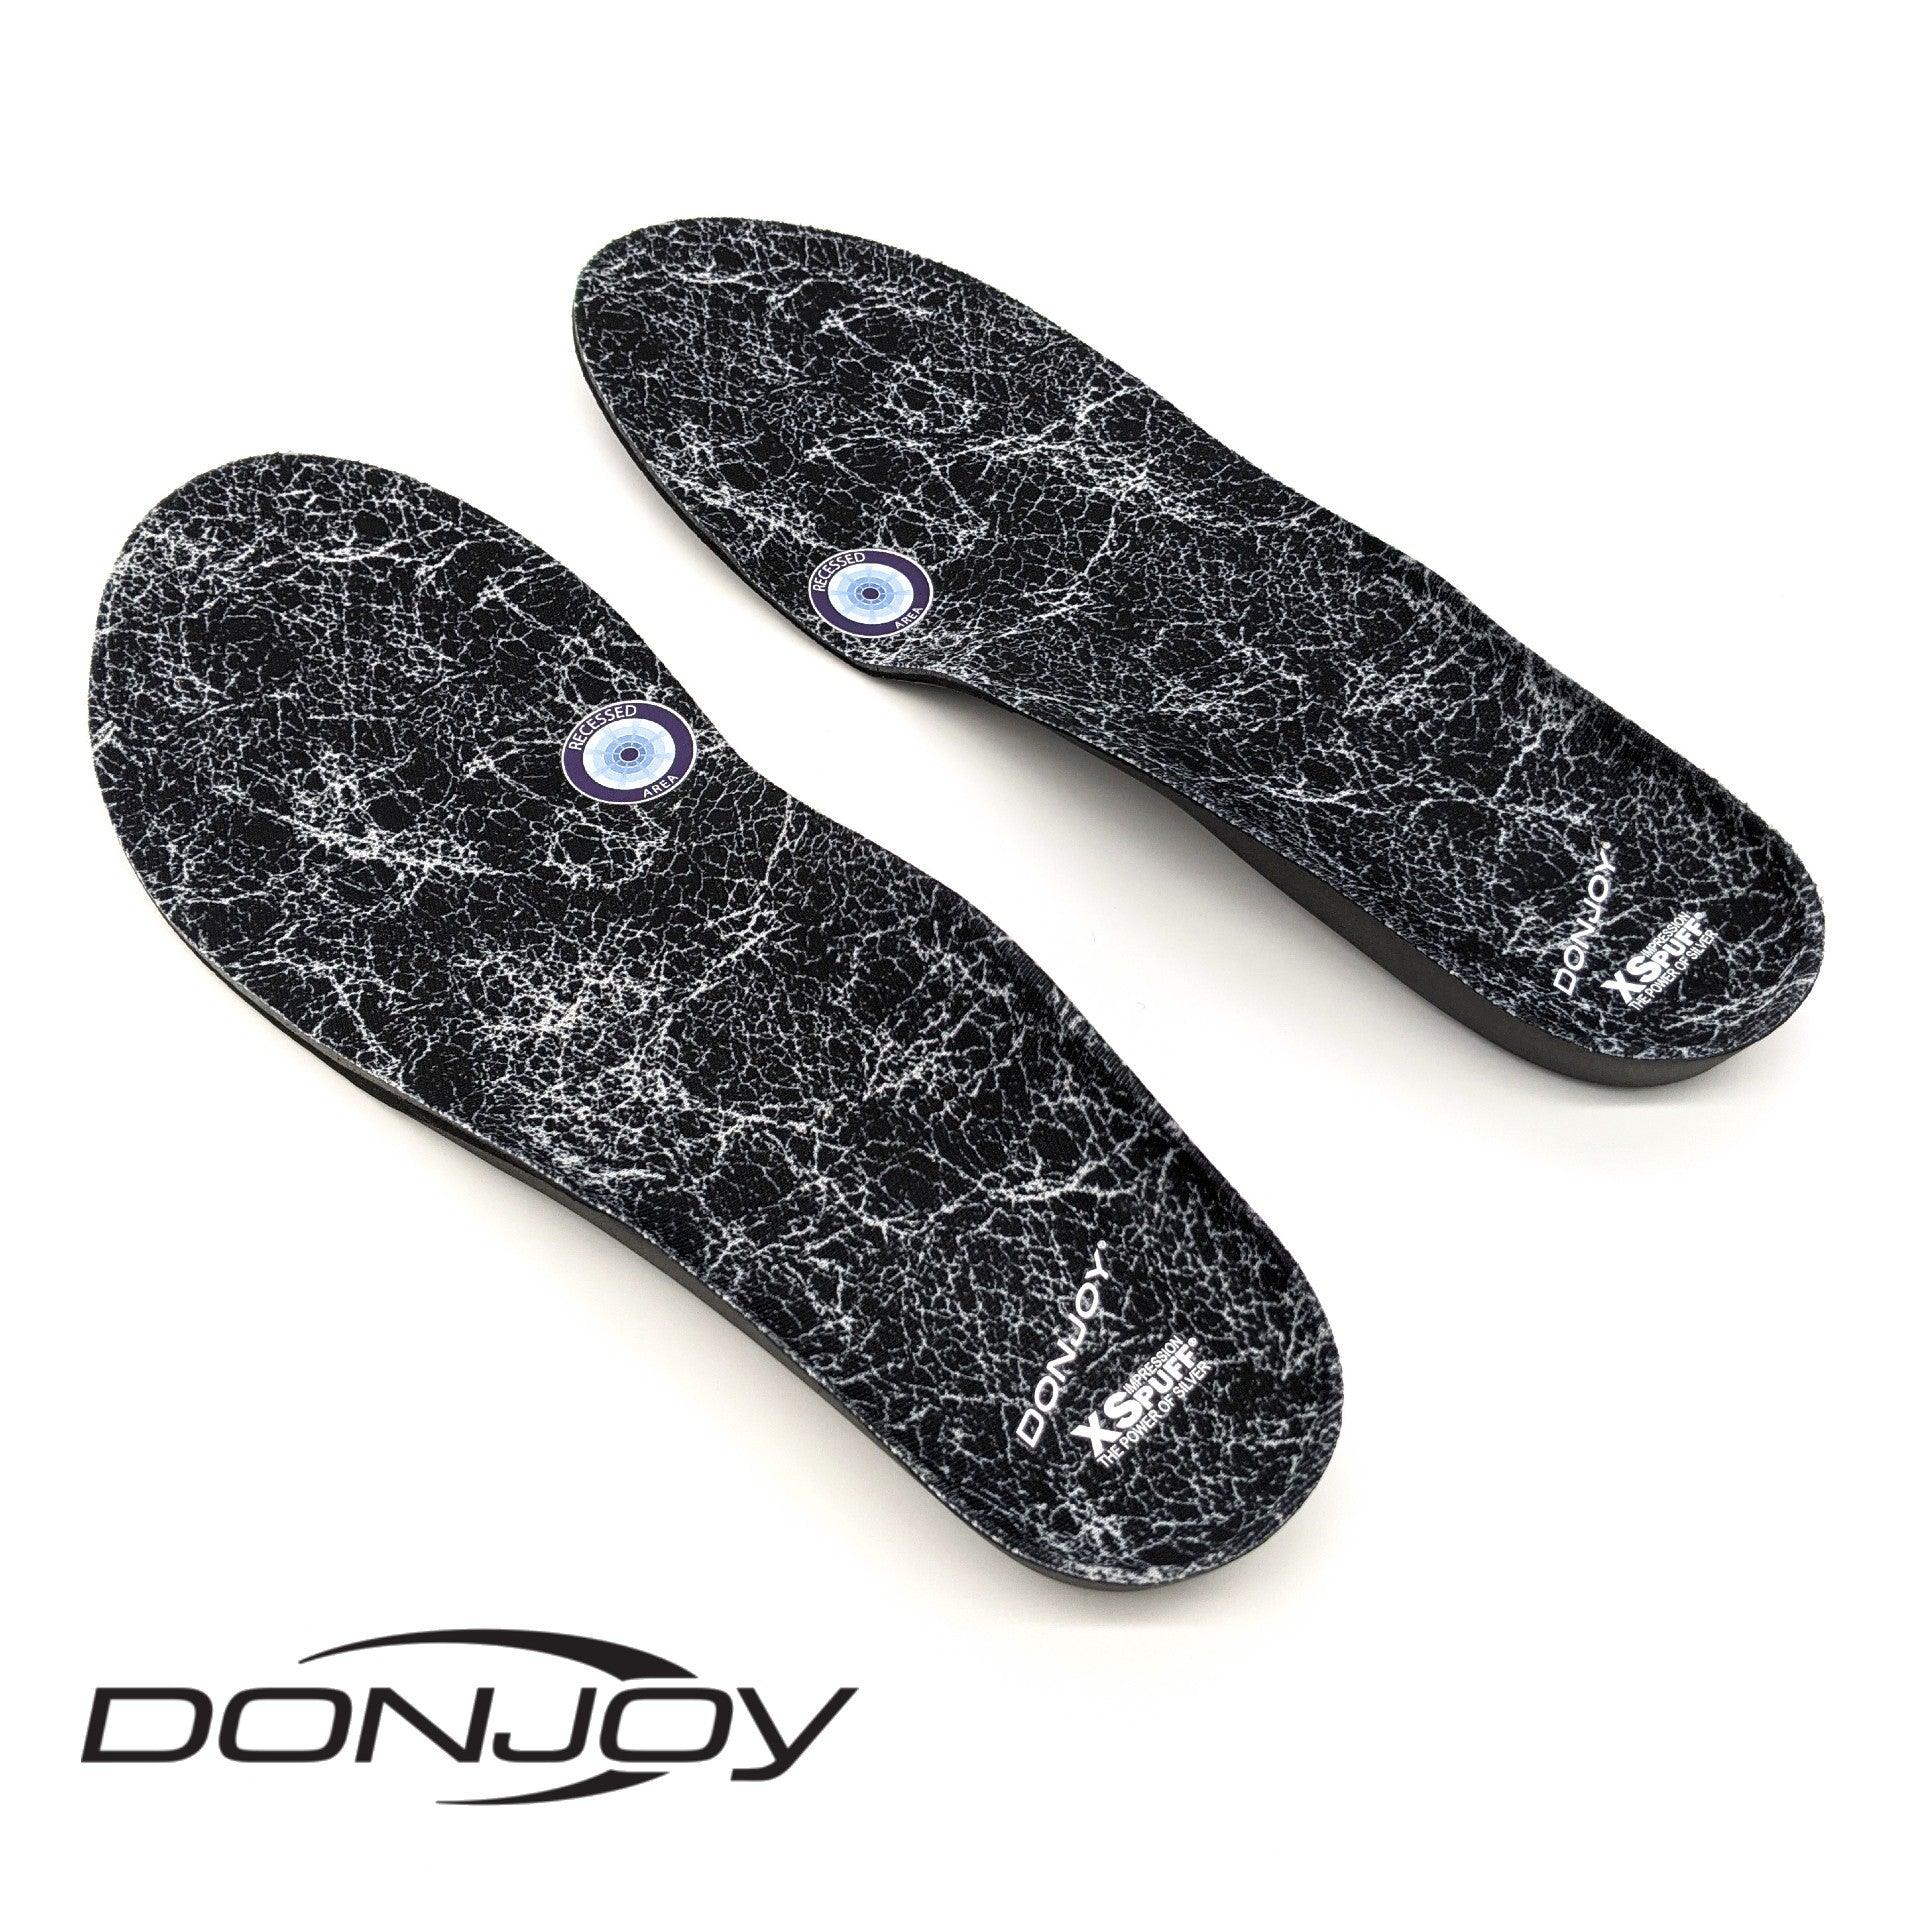 DonJoy® Arch Rival - One Pair - 11-2015-1 DonJoy® Arch Rival - One Pair - undefined by Supply Physical Therapy Accessories, Ankle, Ankle Brace, Arch Support, DonJoy, Foot, Foot and Ankle, Orthotic, Shoe Inserts